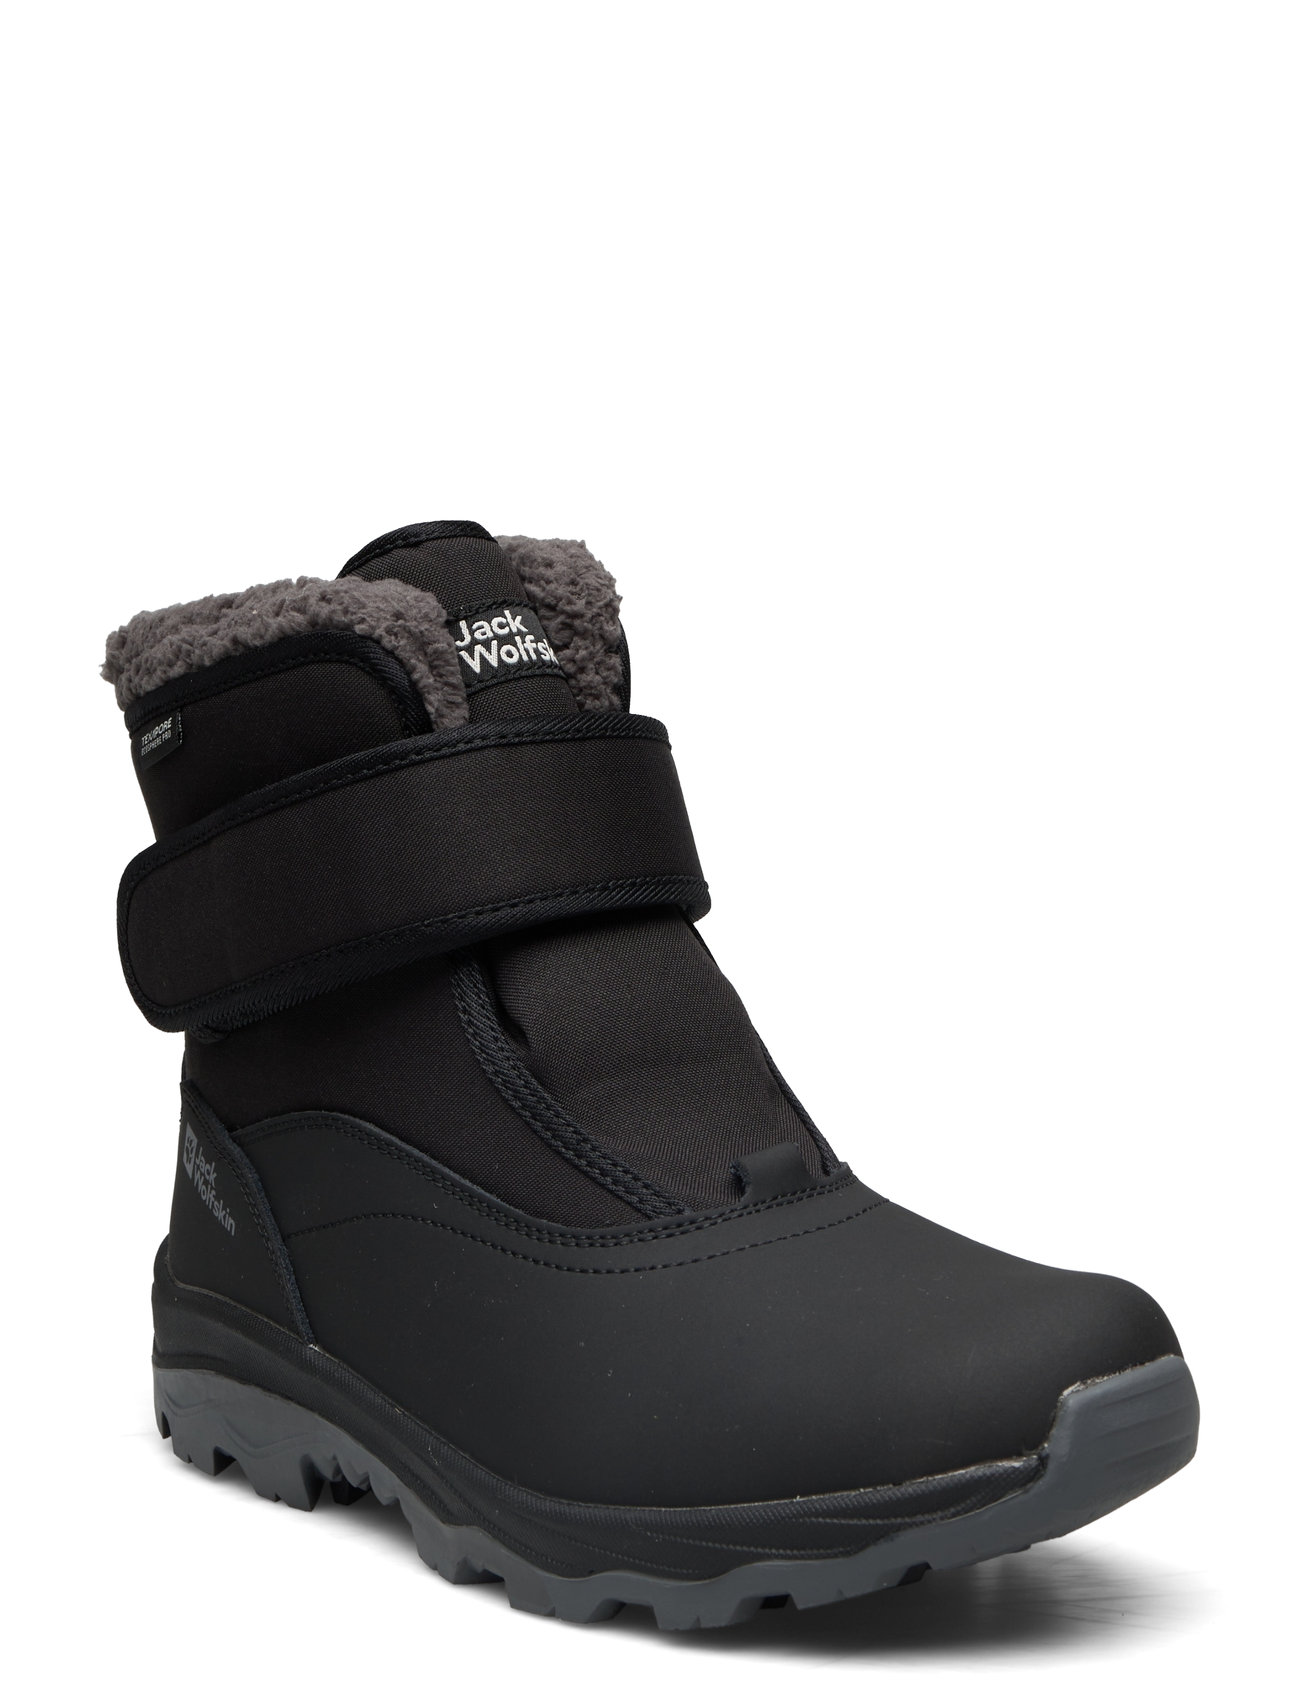 Jack Wolfskin Vojo Shell Boots Texapore K - Vc Mid